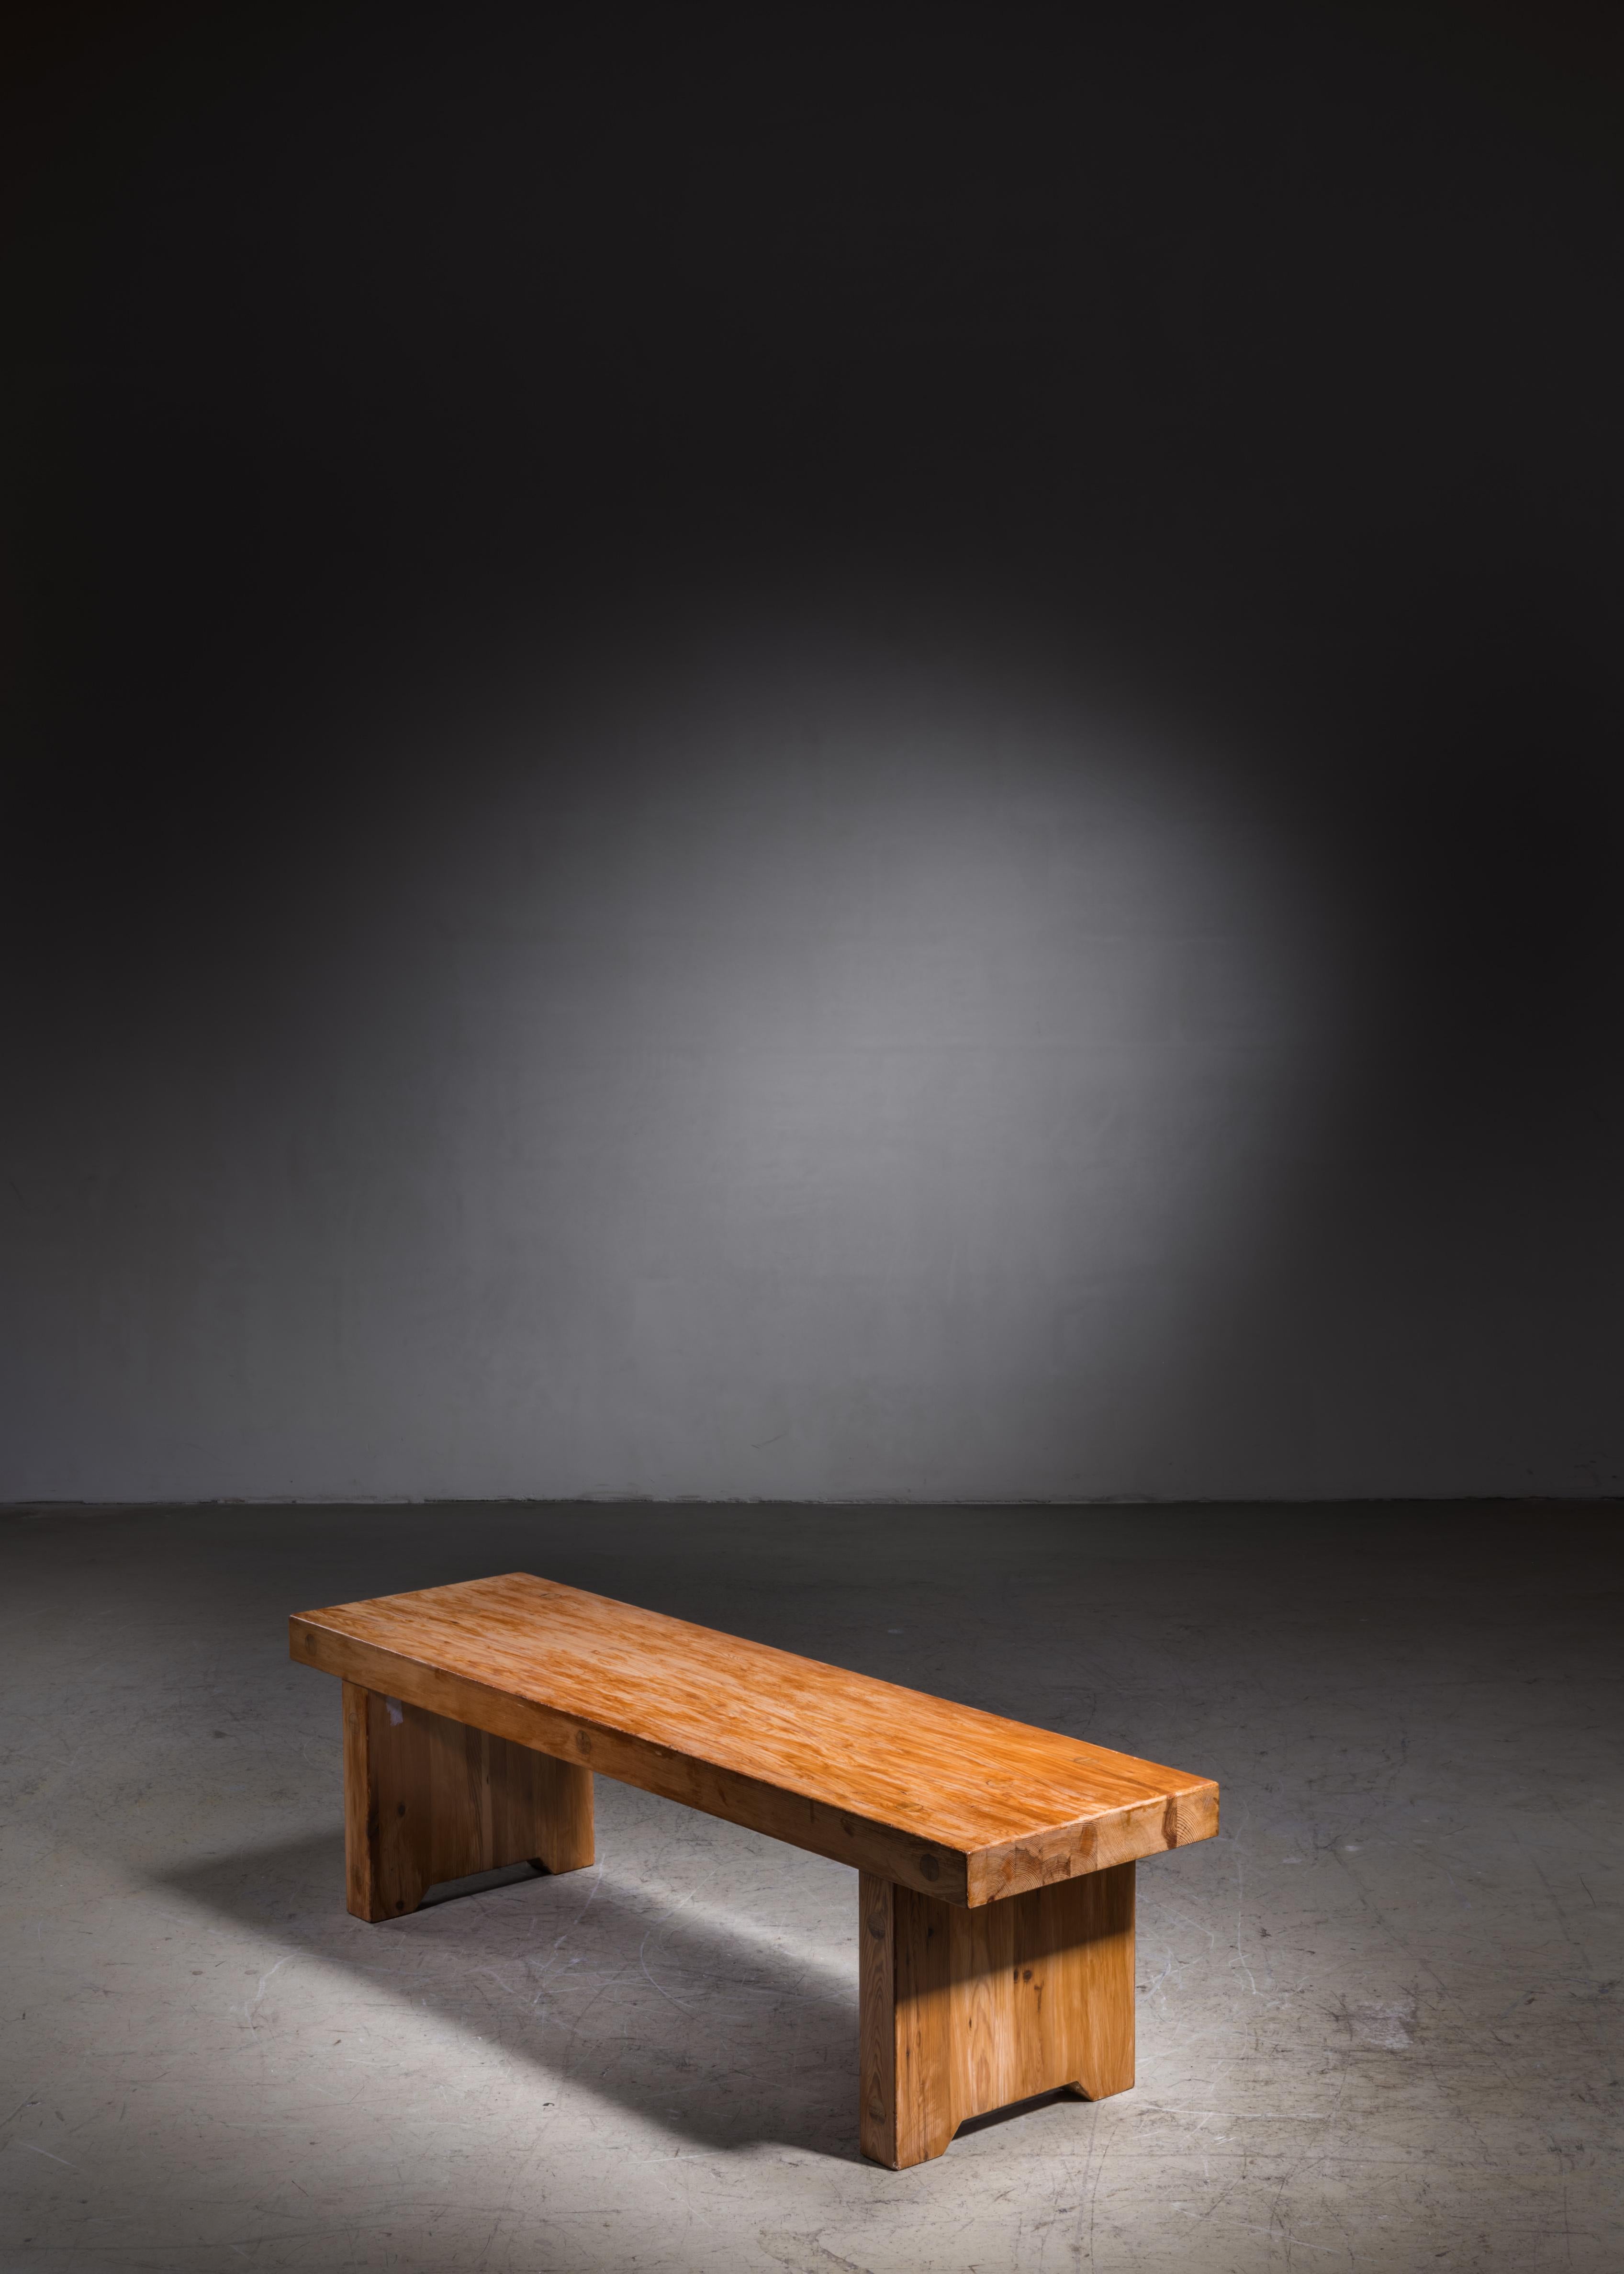 A pine bench or coffee table, attributed to Roland Wilhelmsson. The bench has the large wood connections that Wilhelmsson's work is known for.